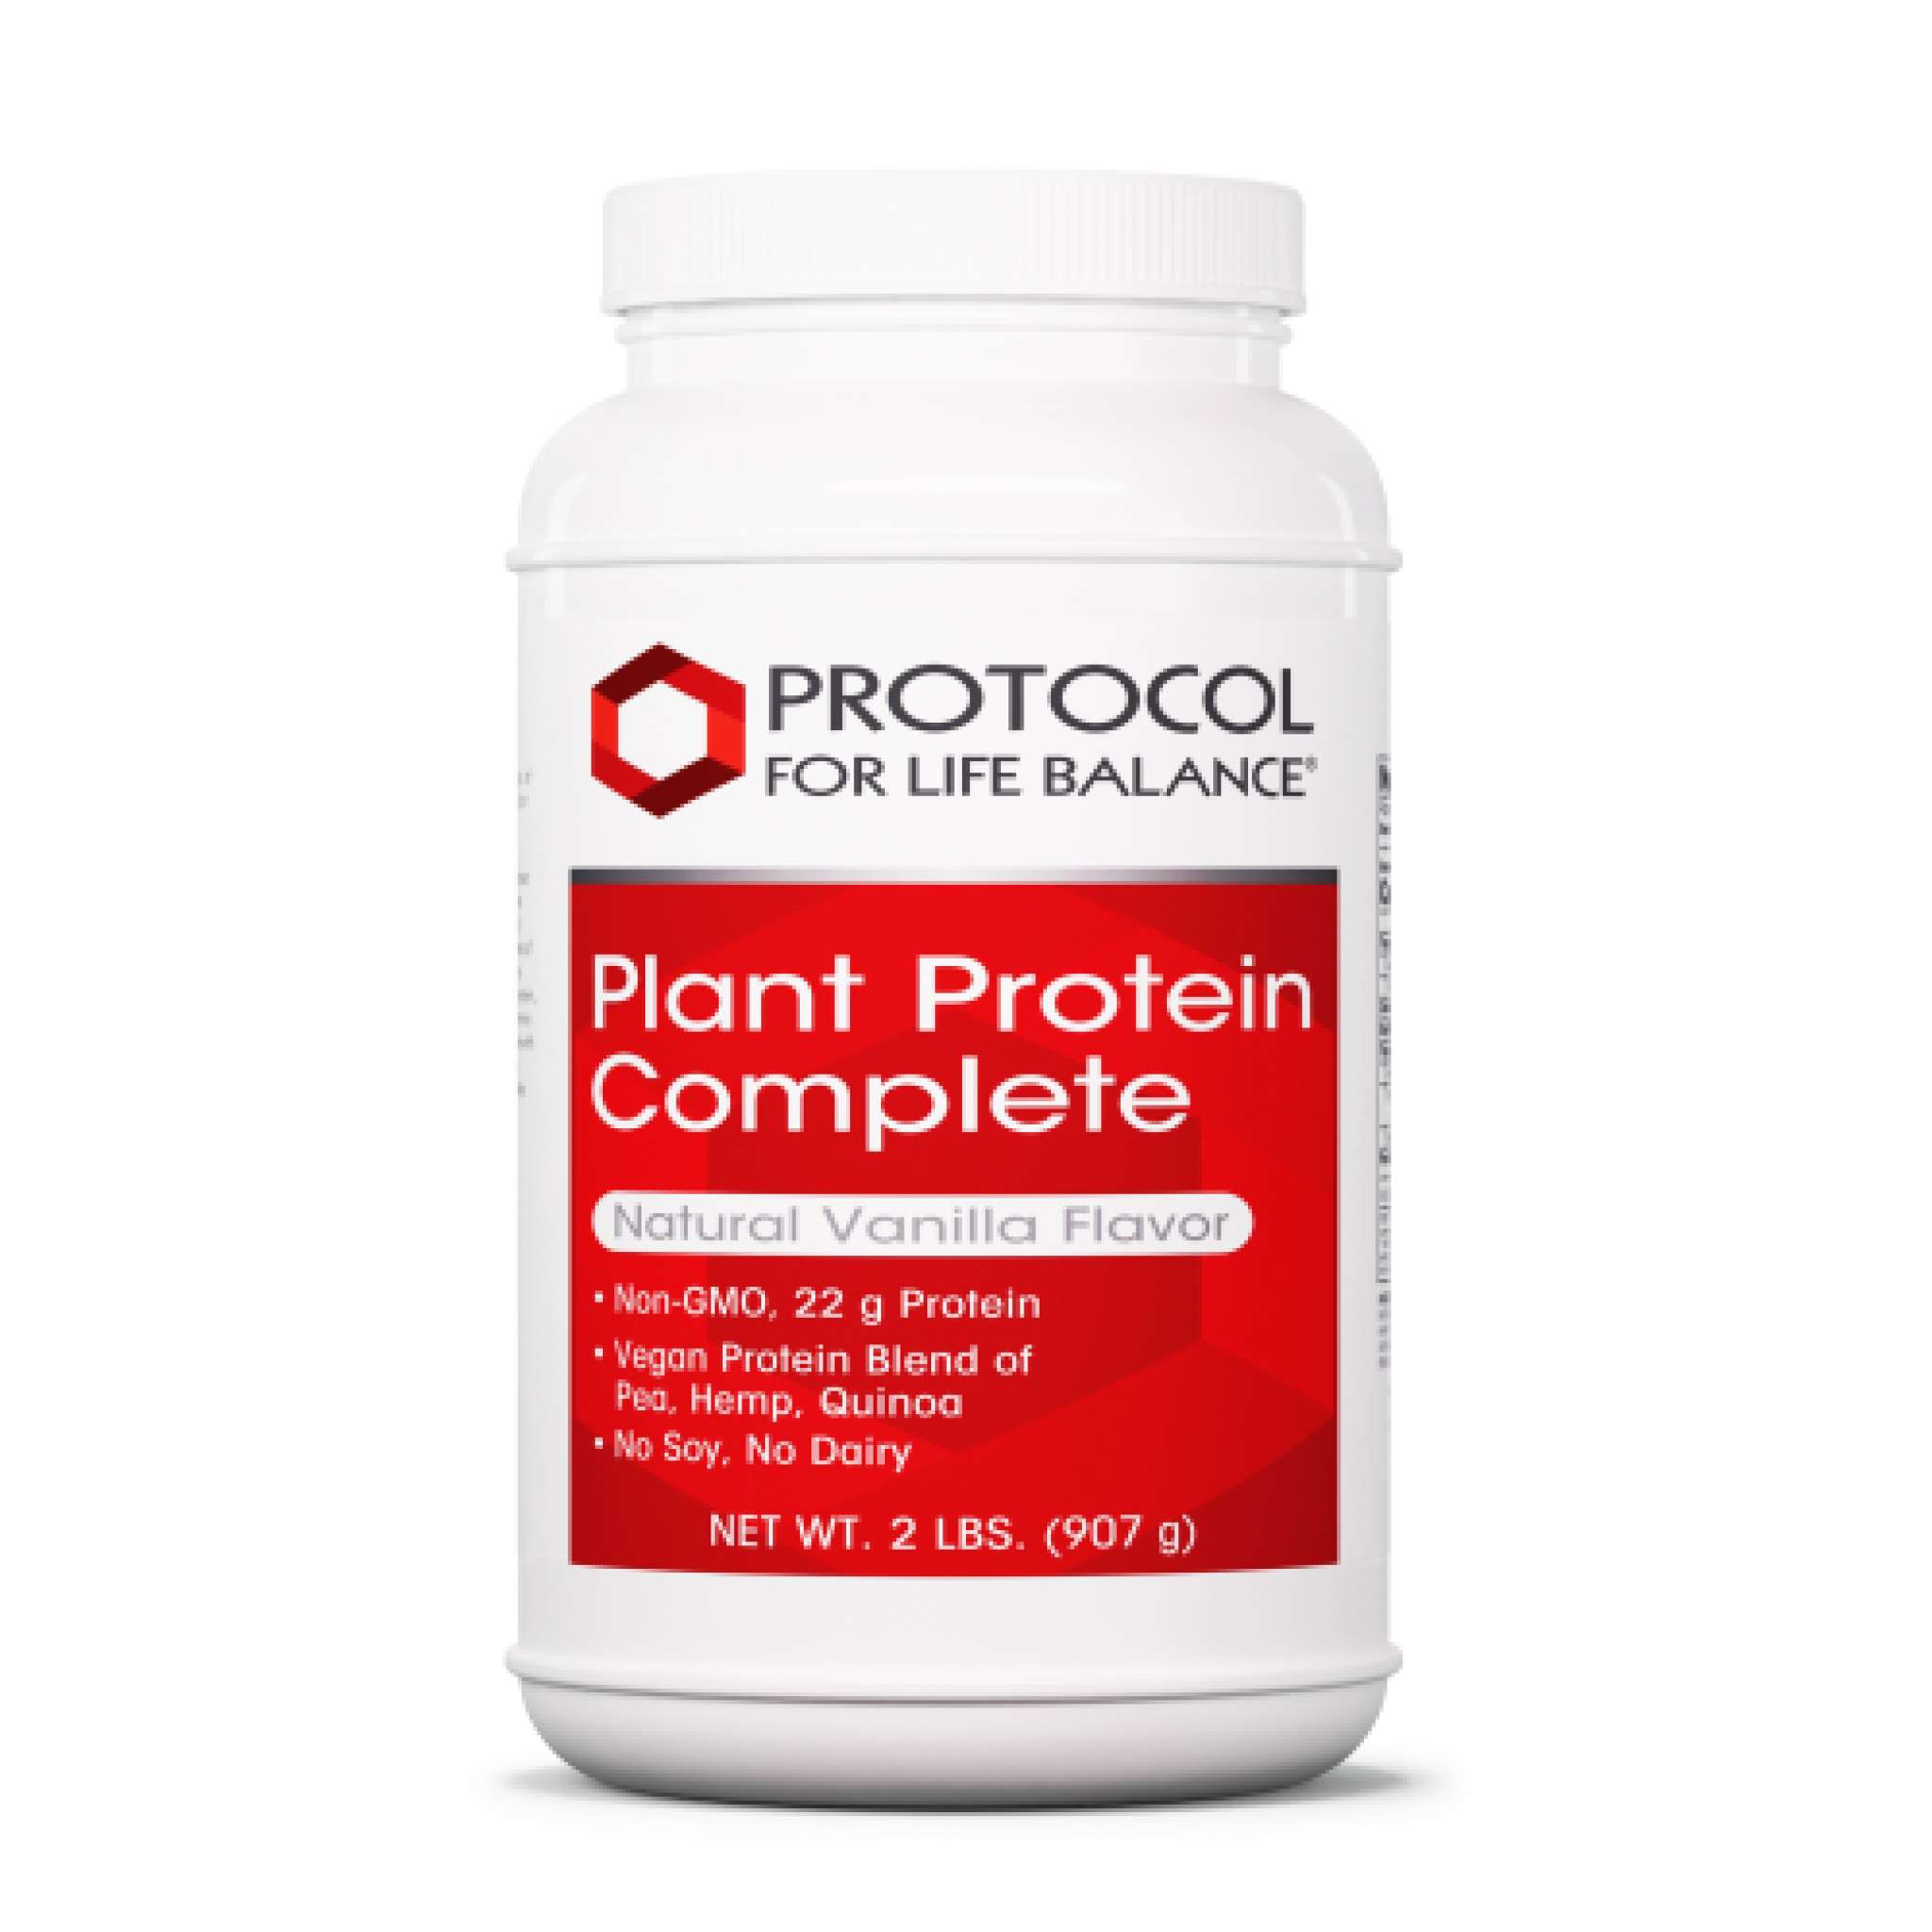 Protocol For Life Balance - Plant Protein Complete